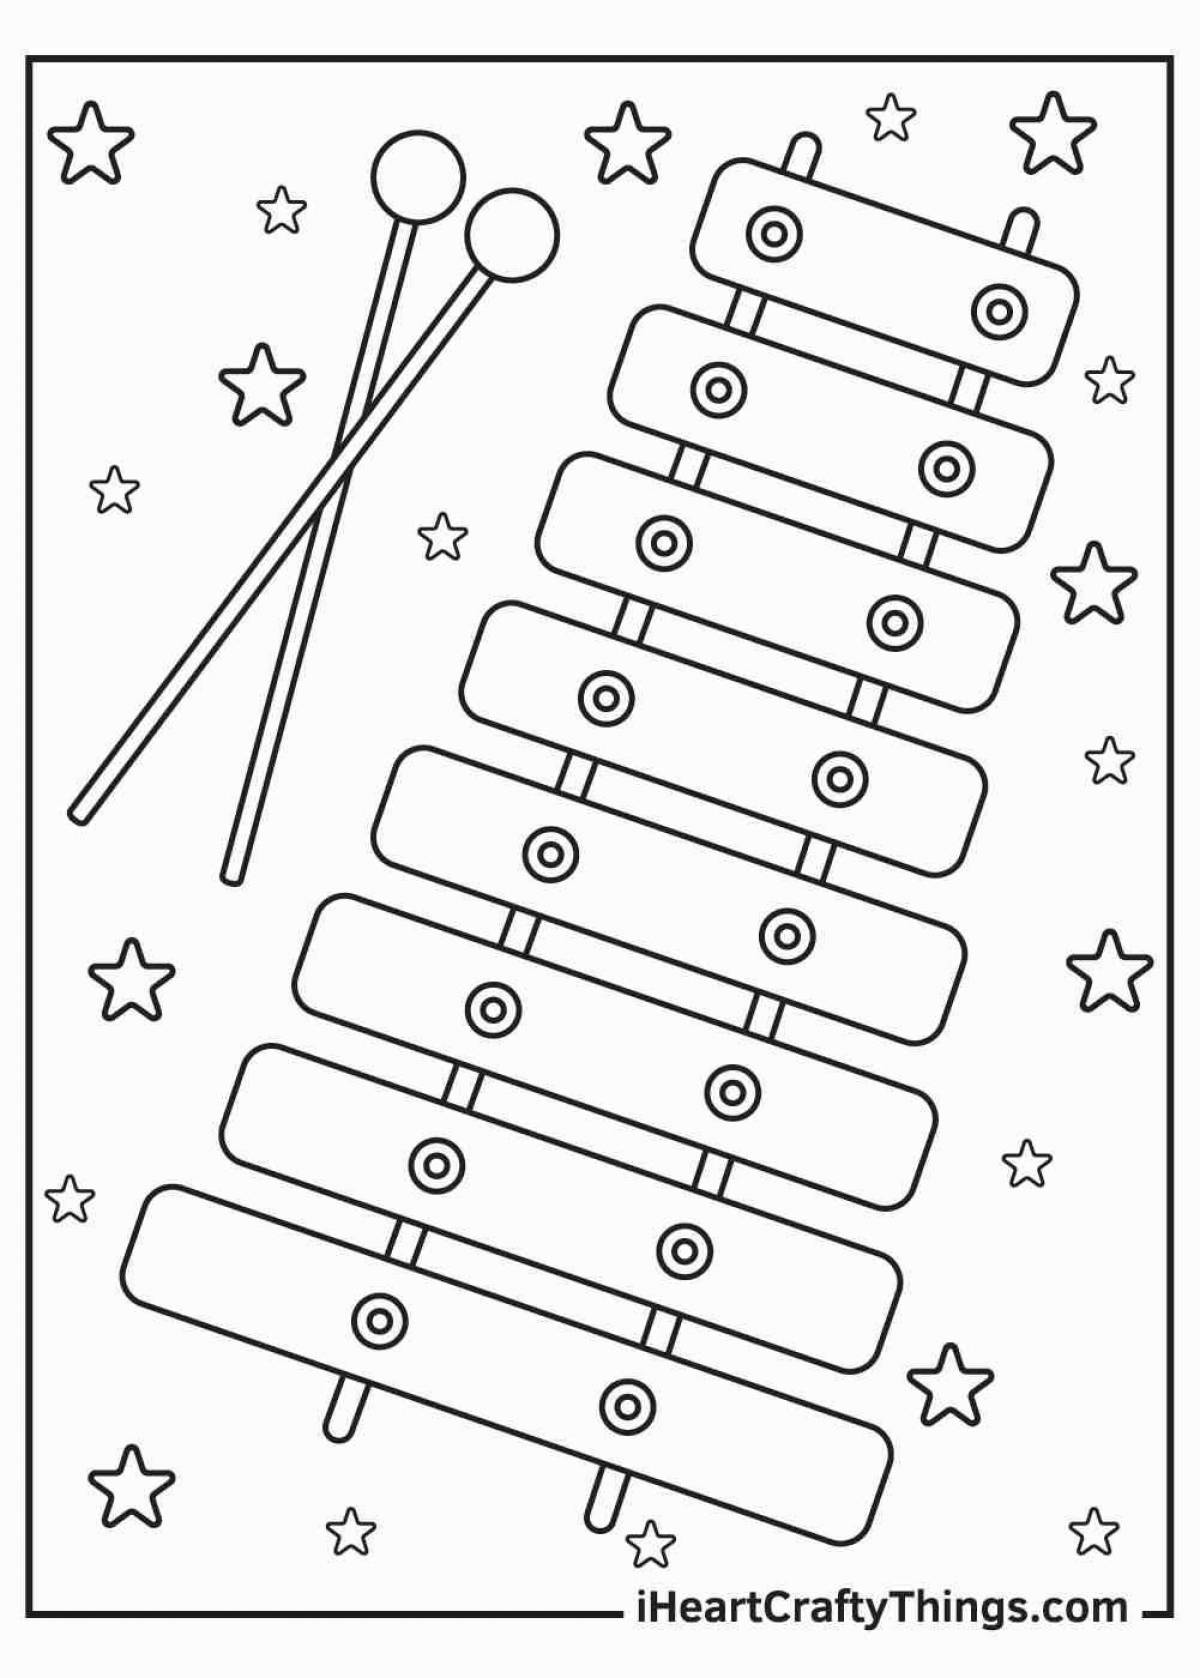 Adorable musical instrument coloring book for 3-4 year olds